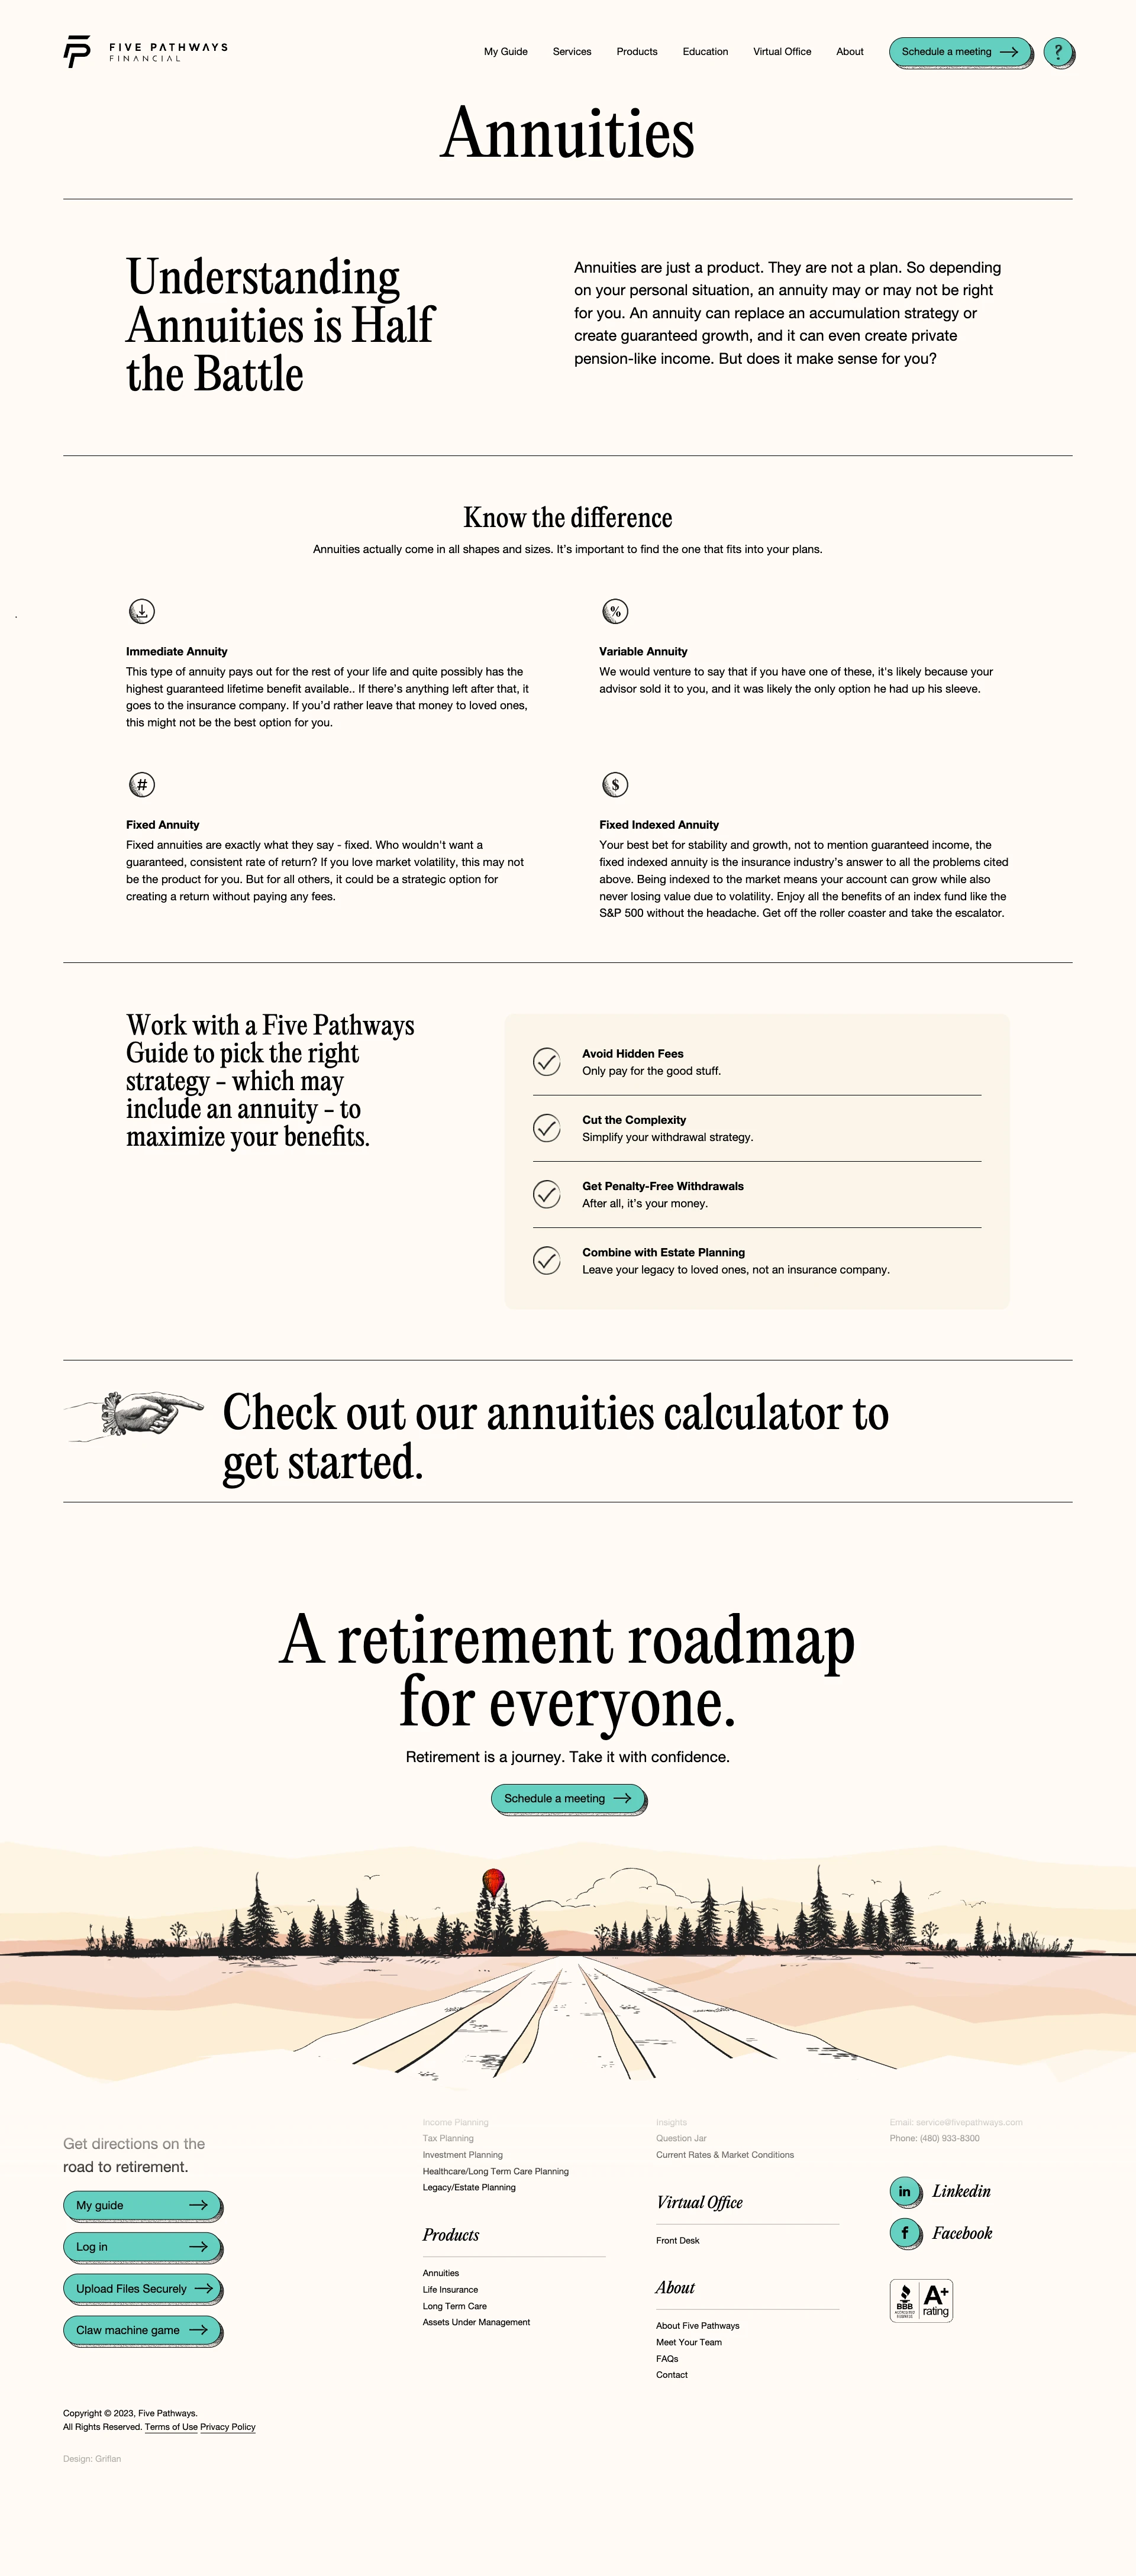 Five Pathways Landing Page Example: A retirement roadmap for everyone. Retirement is a journey. Take it with confidence. Five Pathways is here to simplify your retirement planning. We’ll work with you to create a personalized strategy that incorporates all of the paths of retirement planning: Income, Taxes, Investments, healthcare, and Estate Planning.